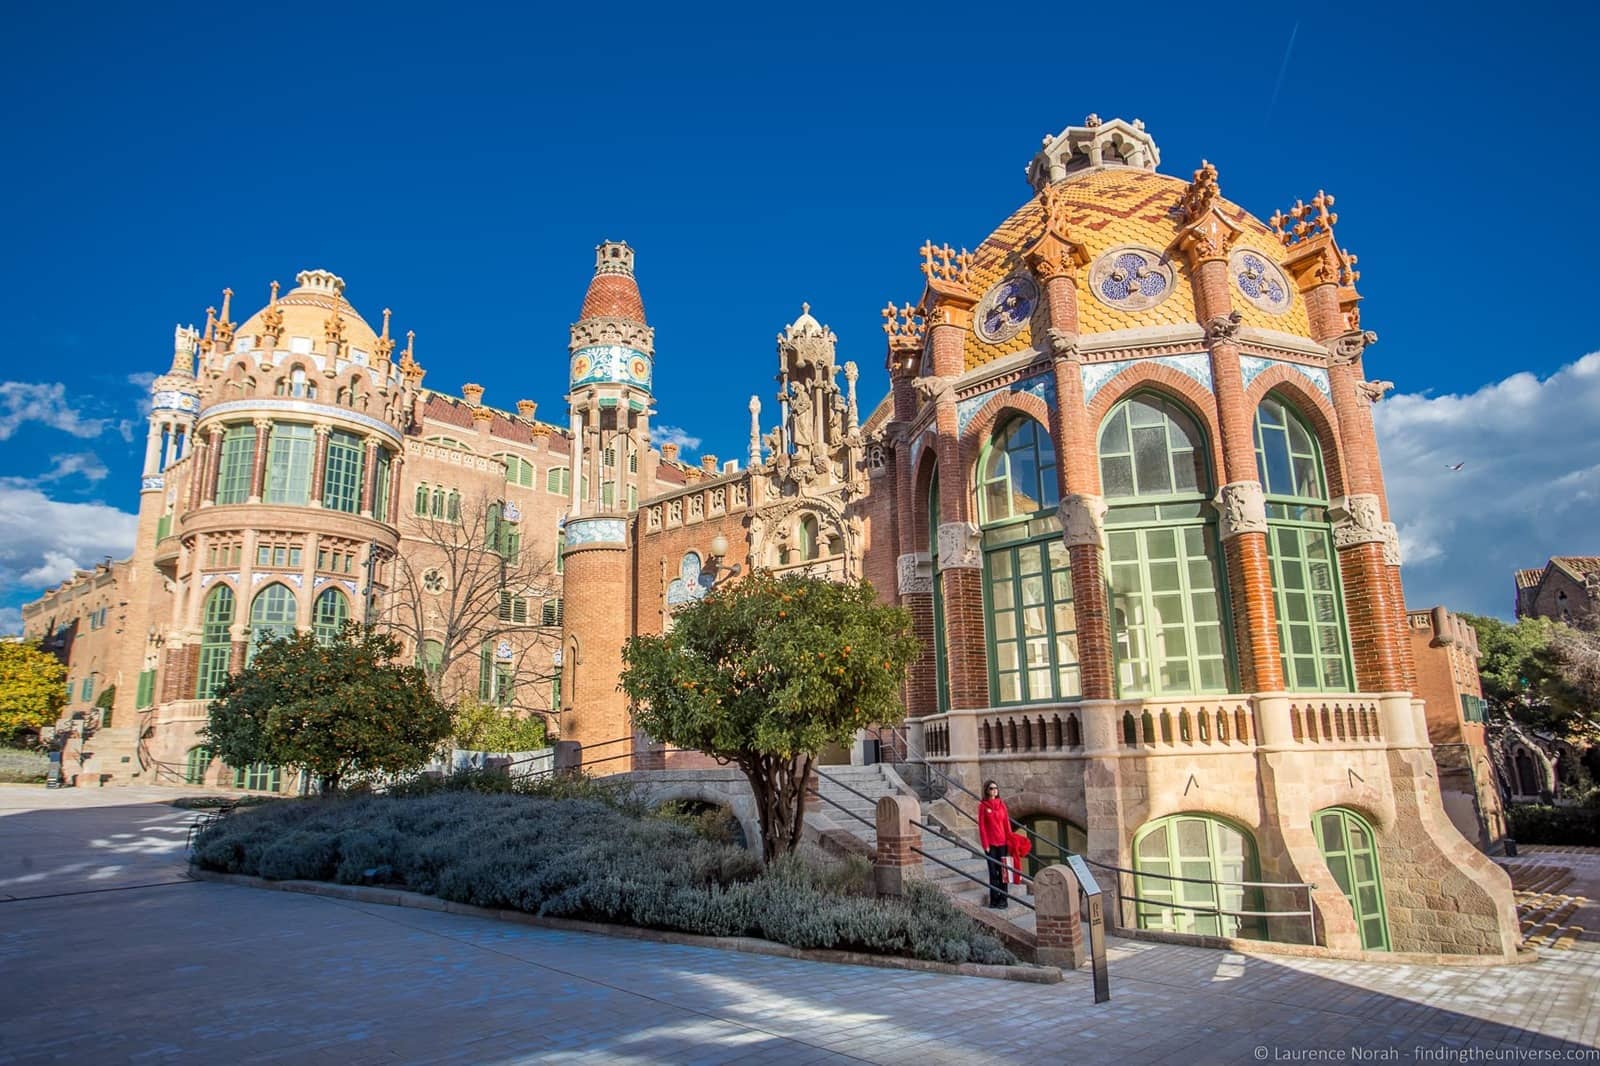 25 Things to Do in Barcelona, Spain (Just My Favorites!)